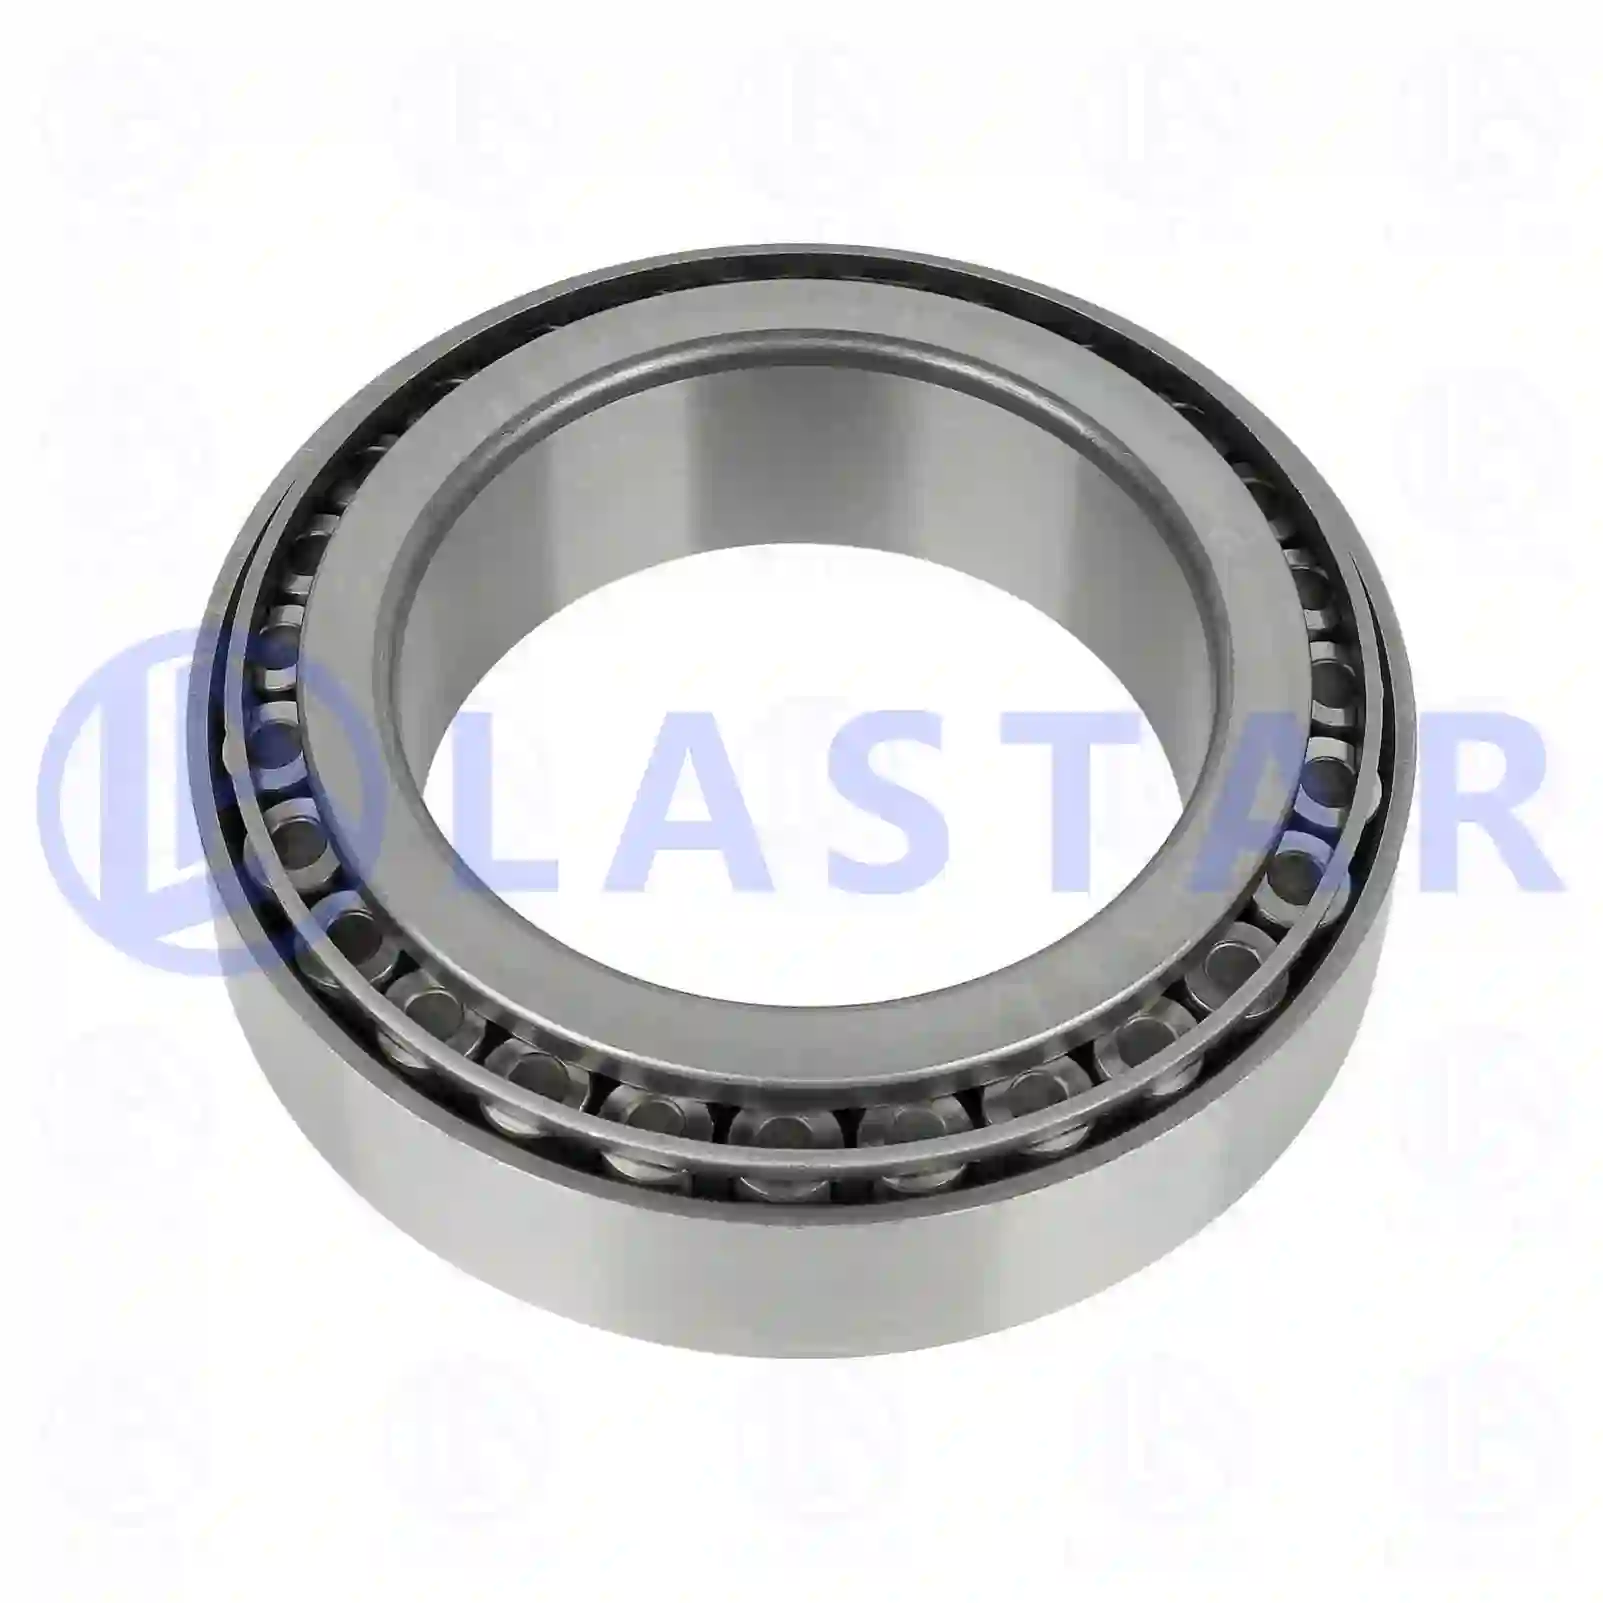 Bearings Tapered roller bearing, la no: 77724898 ,  oem no:0528430, 0676987, 528430, 676987, 005092802, 01104923, 01104923, 1104923, 06324990036, 06324990123, 81934200185, 81934200036, 87524601503, N1011053455, 0009809602, 0029818405, 0029819005, 0039818605, 0209814805, 3869817705, 0023432871, 676987, WHT006376, ZG03023-0008 Lastar Spare Part | Truck Spare Parts, Auotomotive Spare Parts